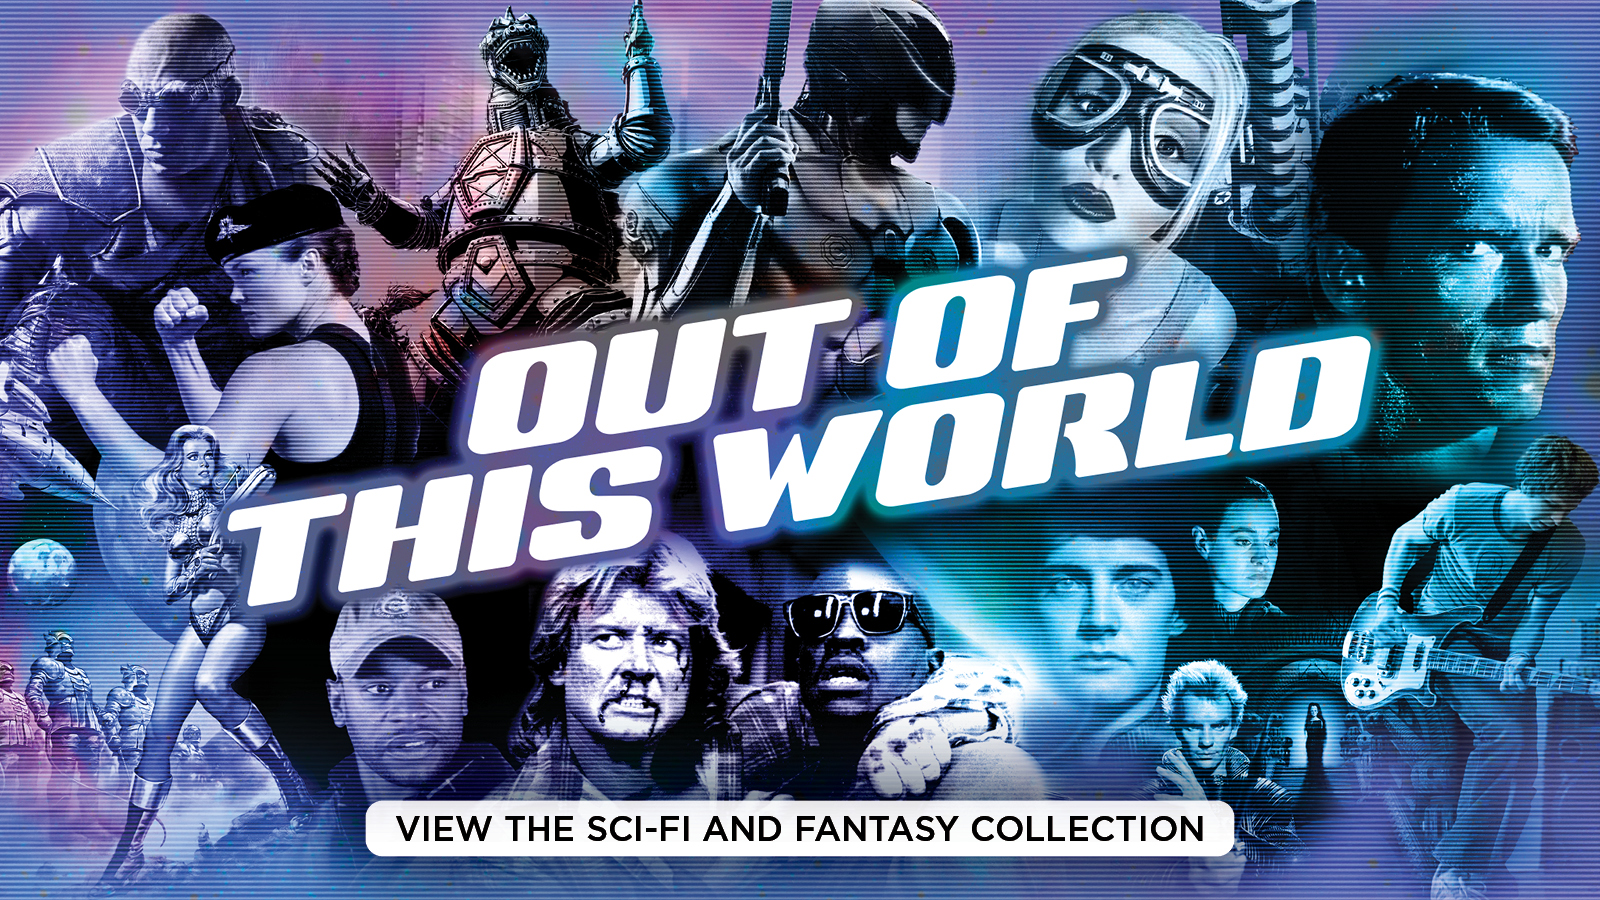 Out of this World: View the Sci-fi and fantasy collection